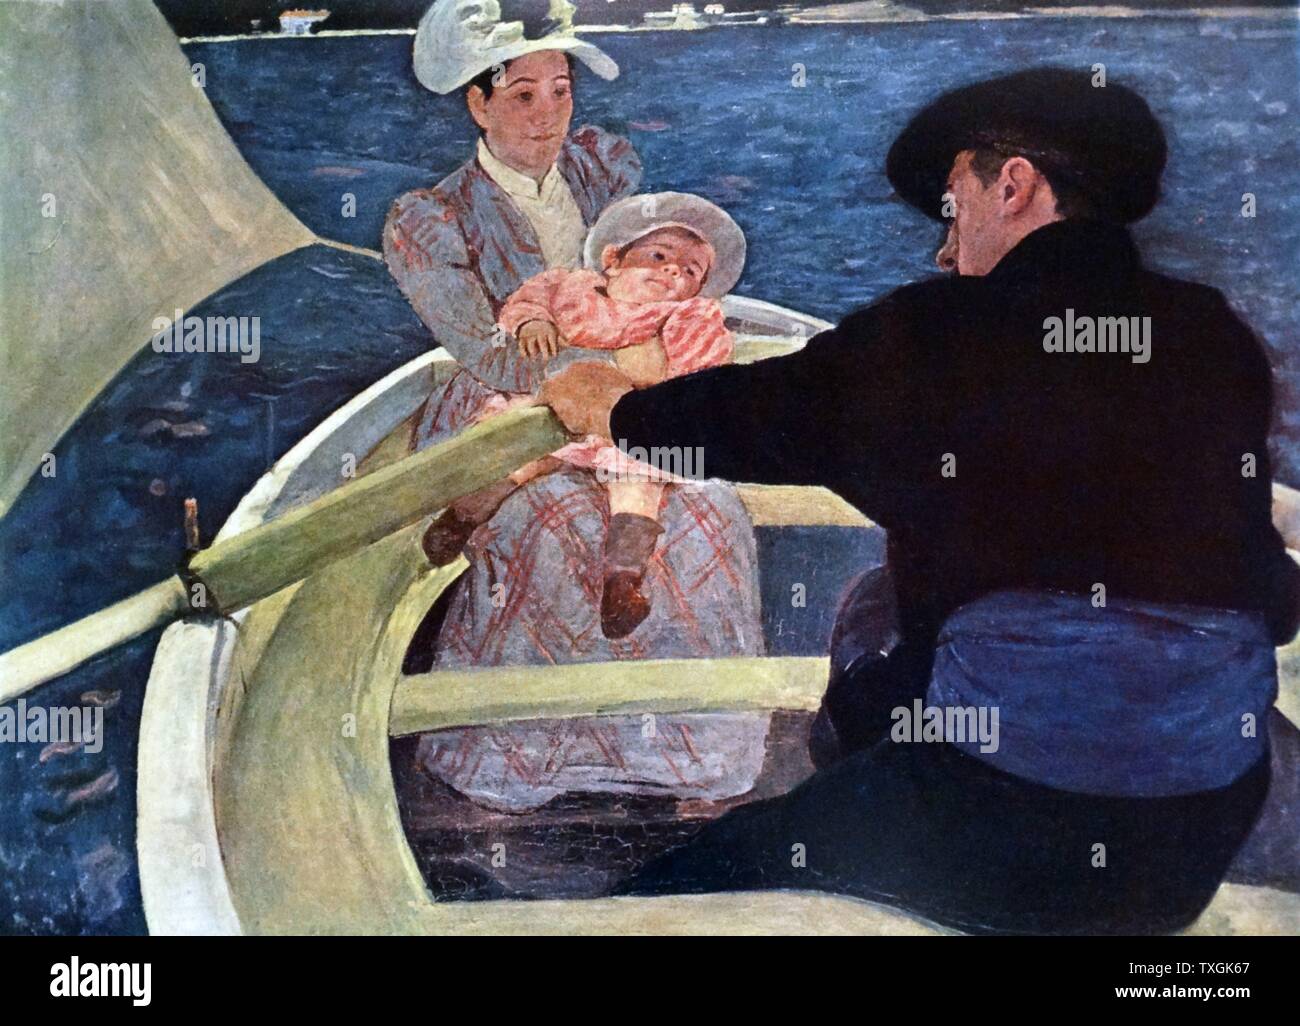 Painting titled 'The Boating Party' by Mary Cassatt (1844-1926) n American painter and printmaker. Dated 19th Century Stock Photo